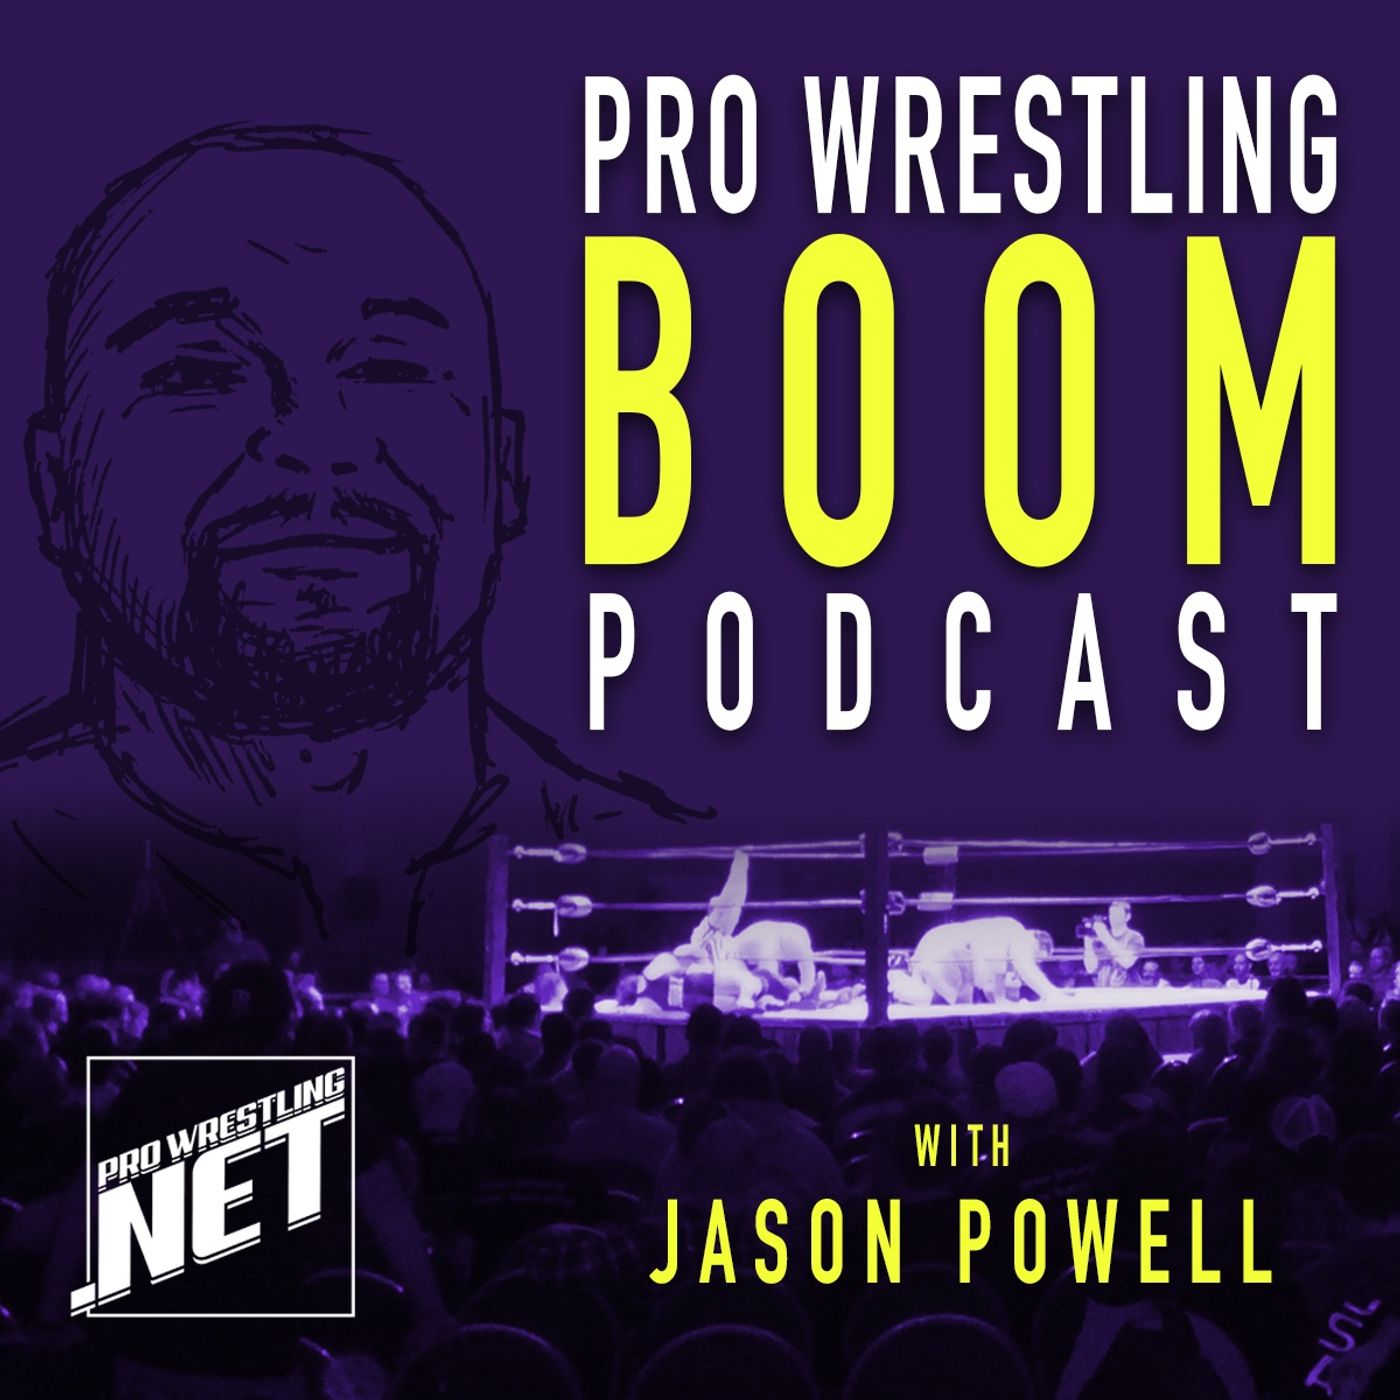 03/22 Pro Wrestling Boom Podcast With Jason Powell (Episode 152): Pro Wrestling Boom Live - Post WWE Fastlane edition with Jonny Fairplay